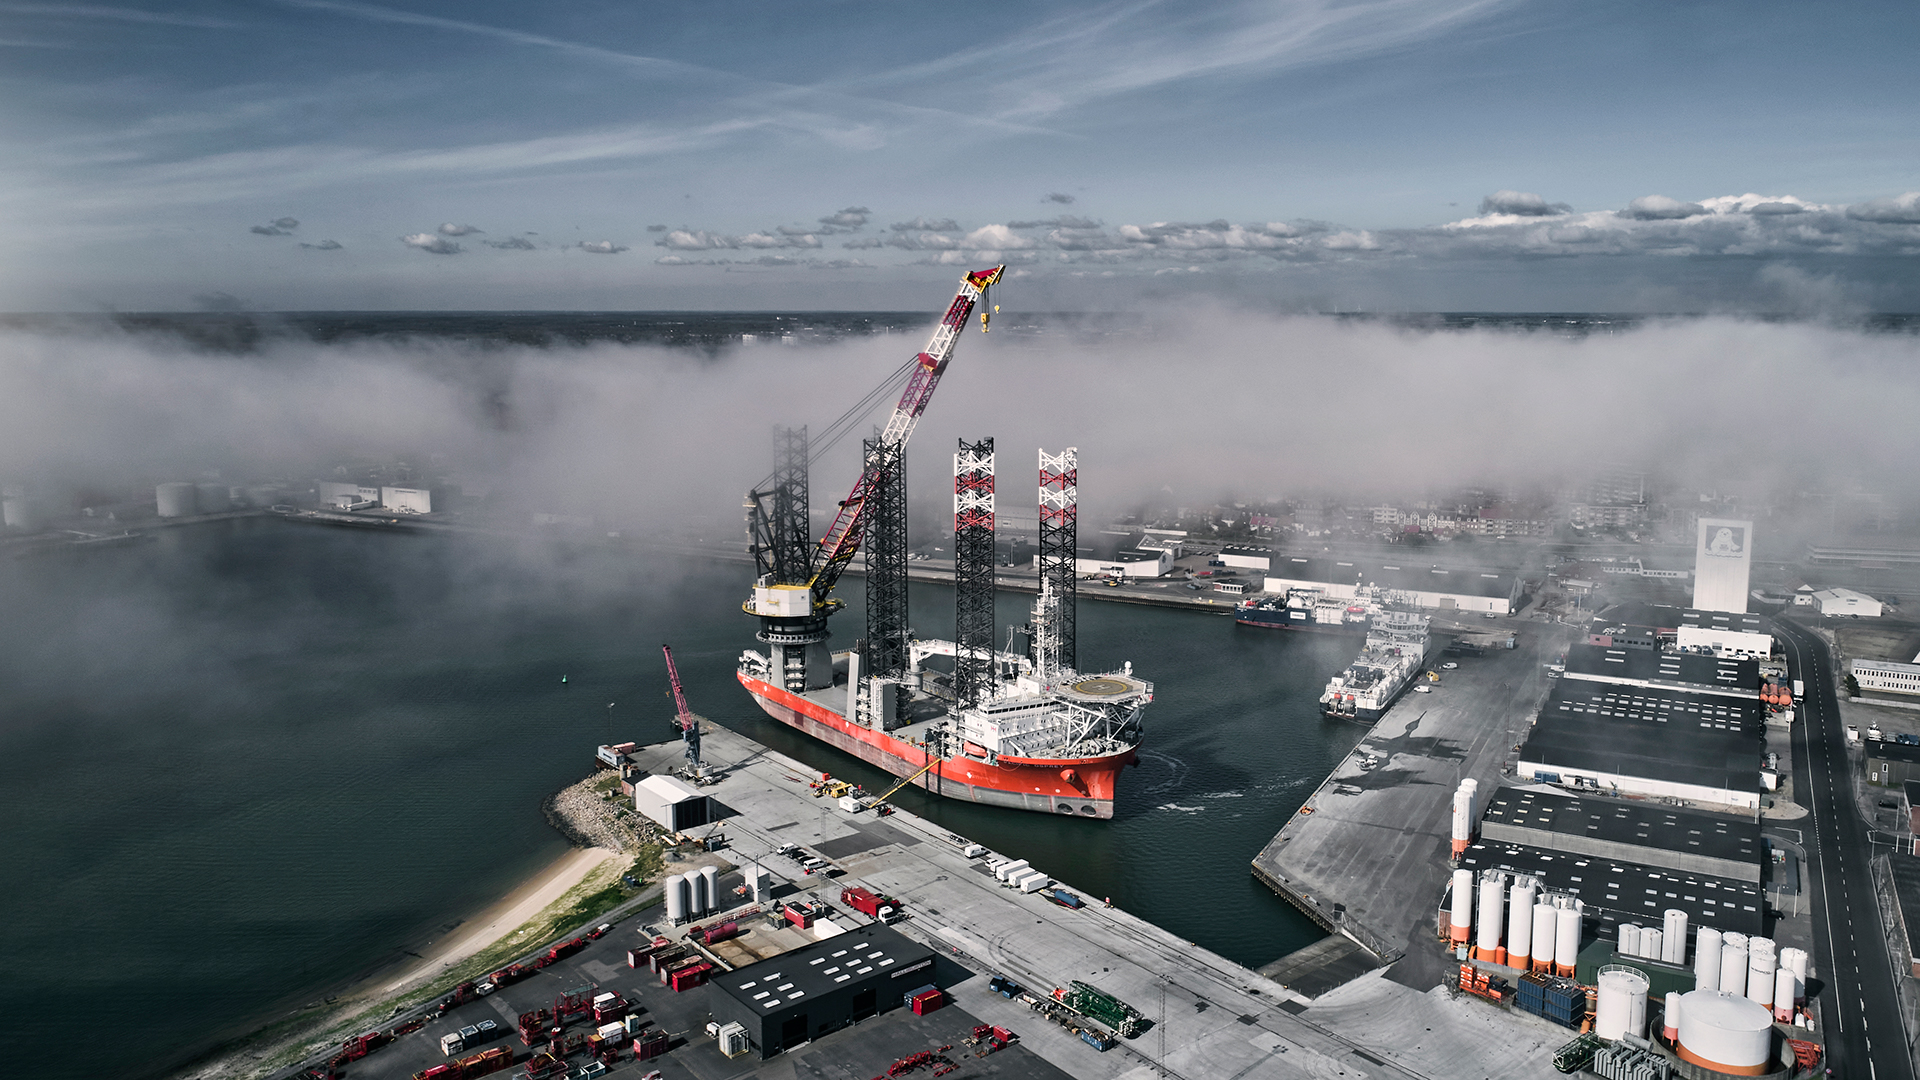 An aerial photo of the Wind Osprey vessel in port